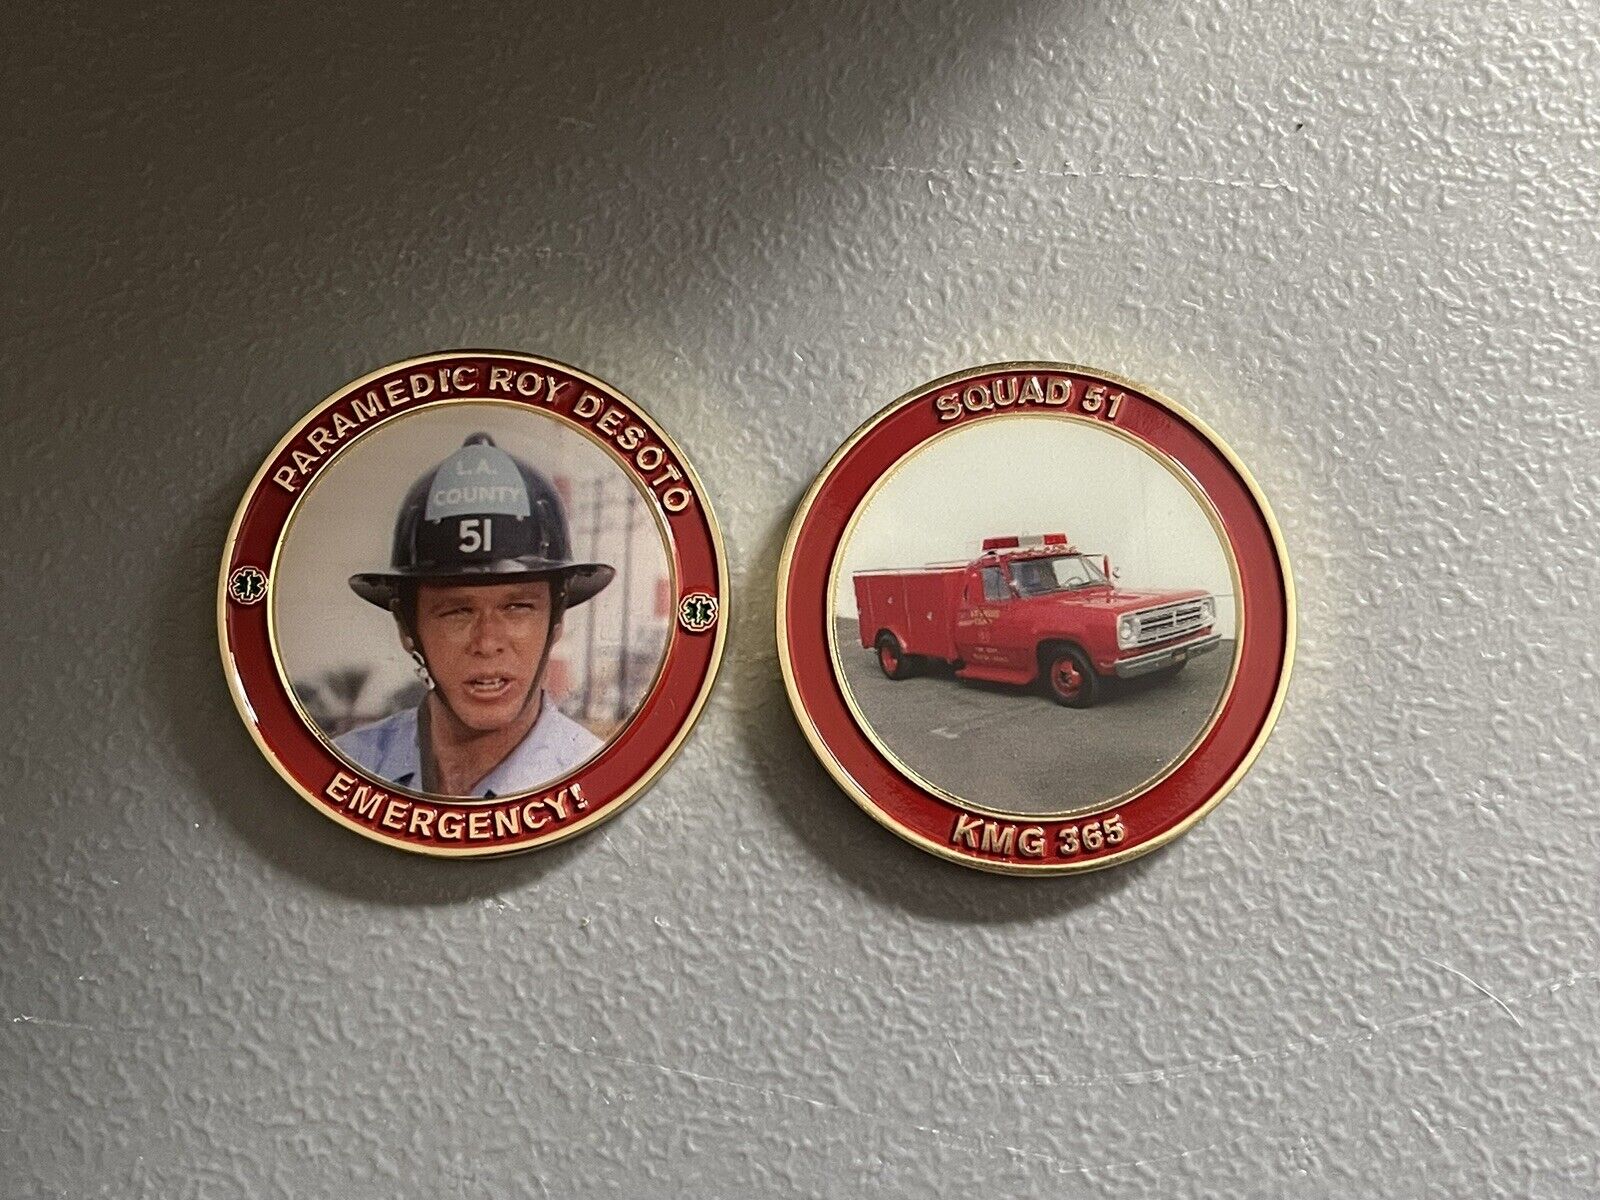 Squad 51 … Emergency Roy DeSoto Challenge Coin